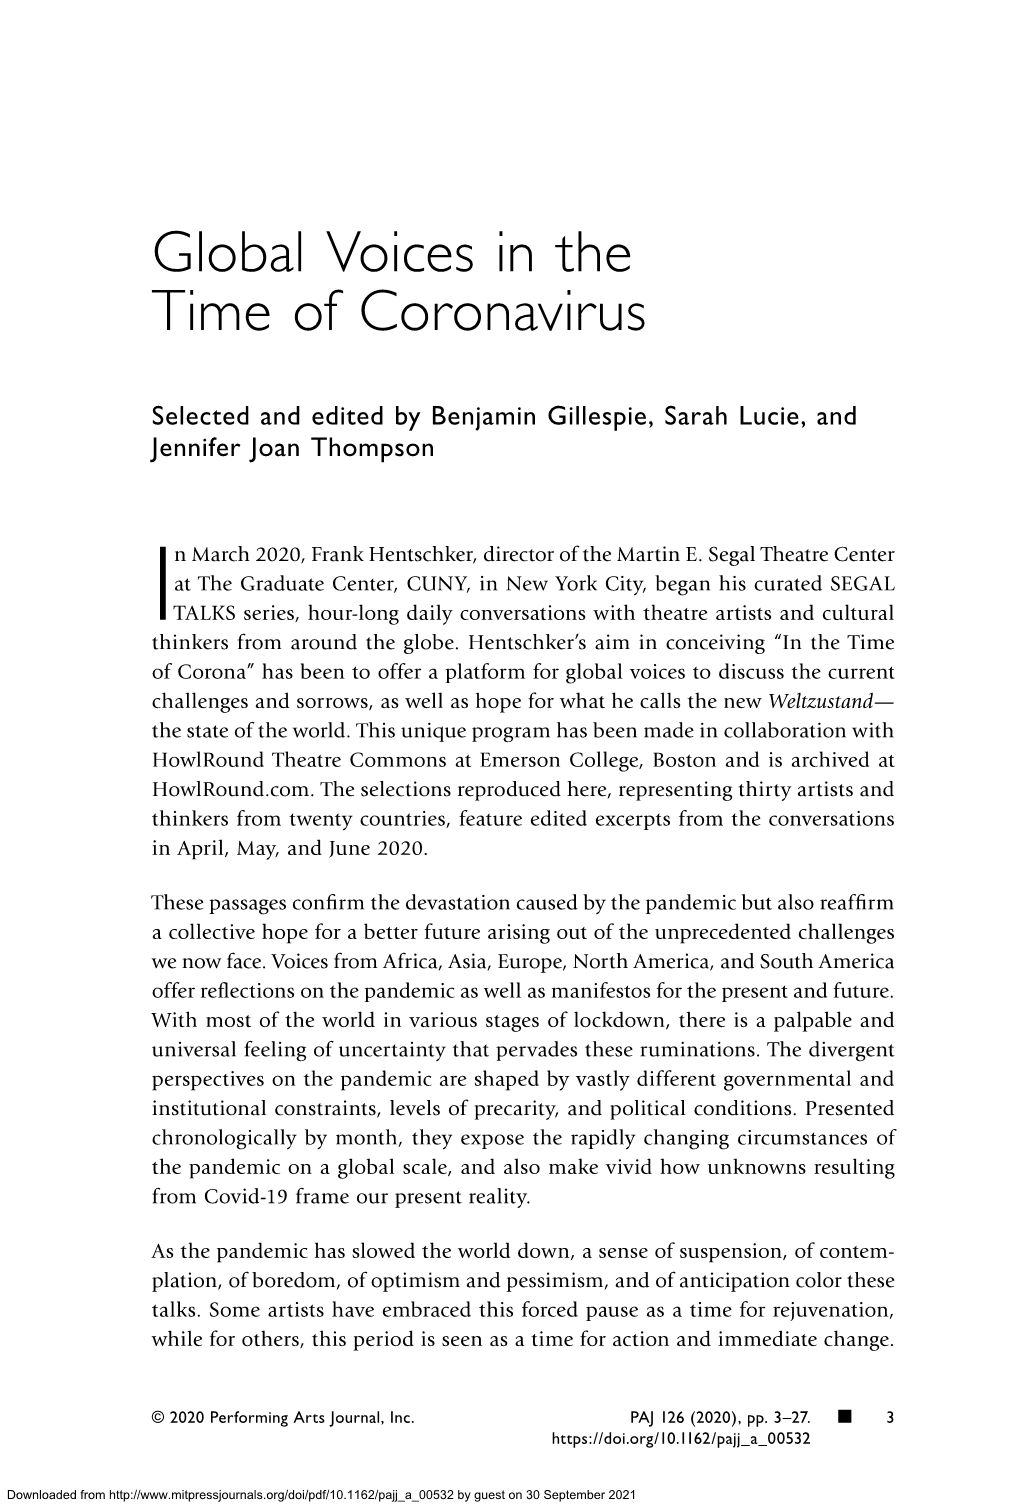 Global Voices in the Time of Coronavirus